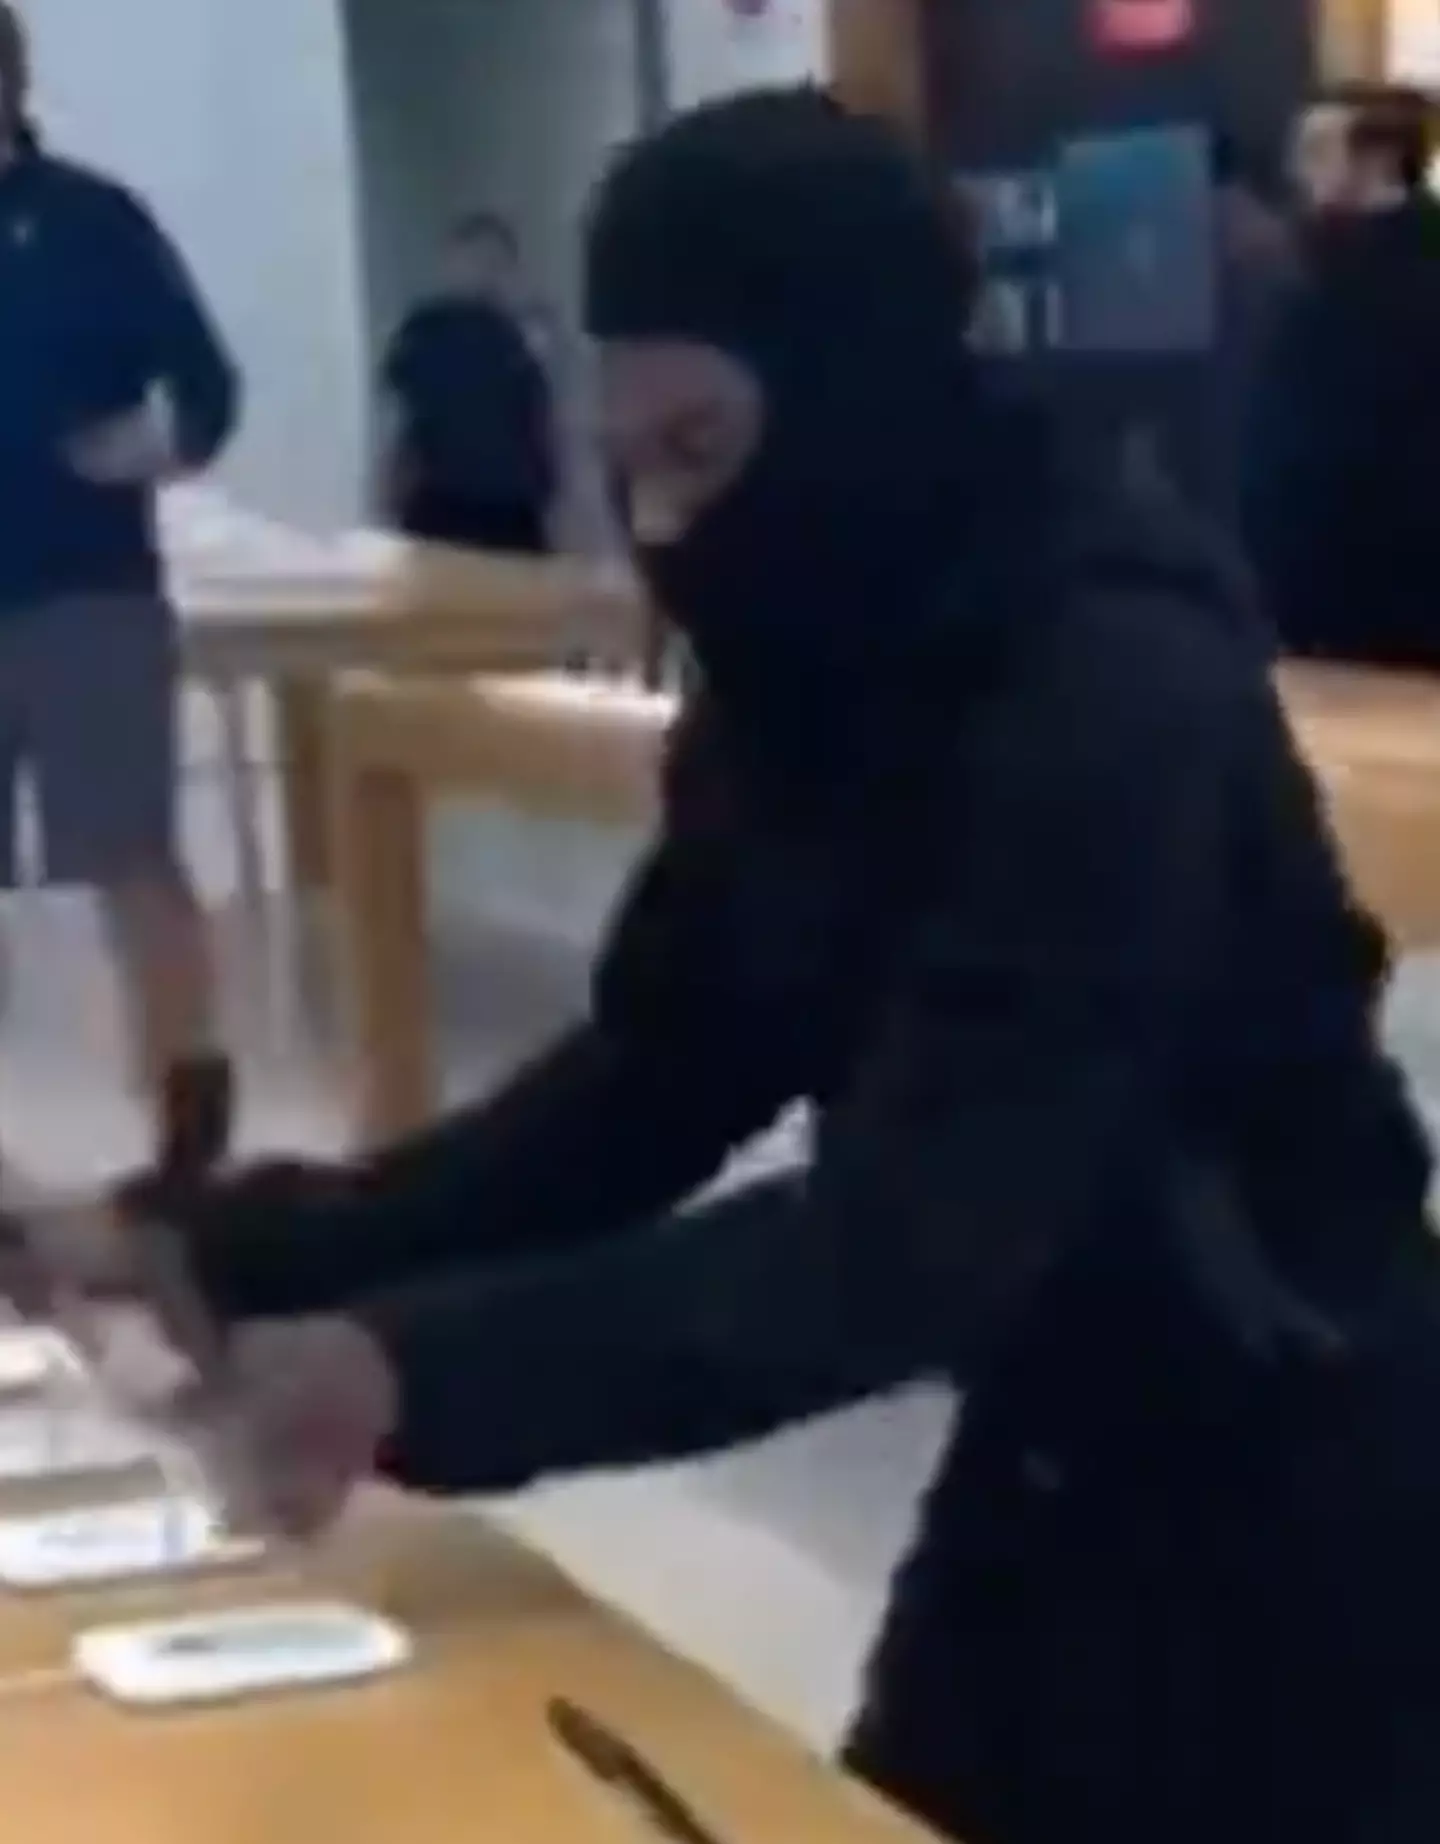 The footage shows a man with his face hidden stealing display iPhones from an Apple Store.